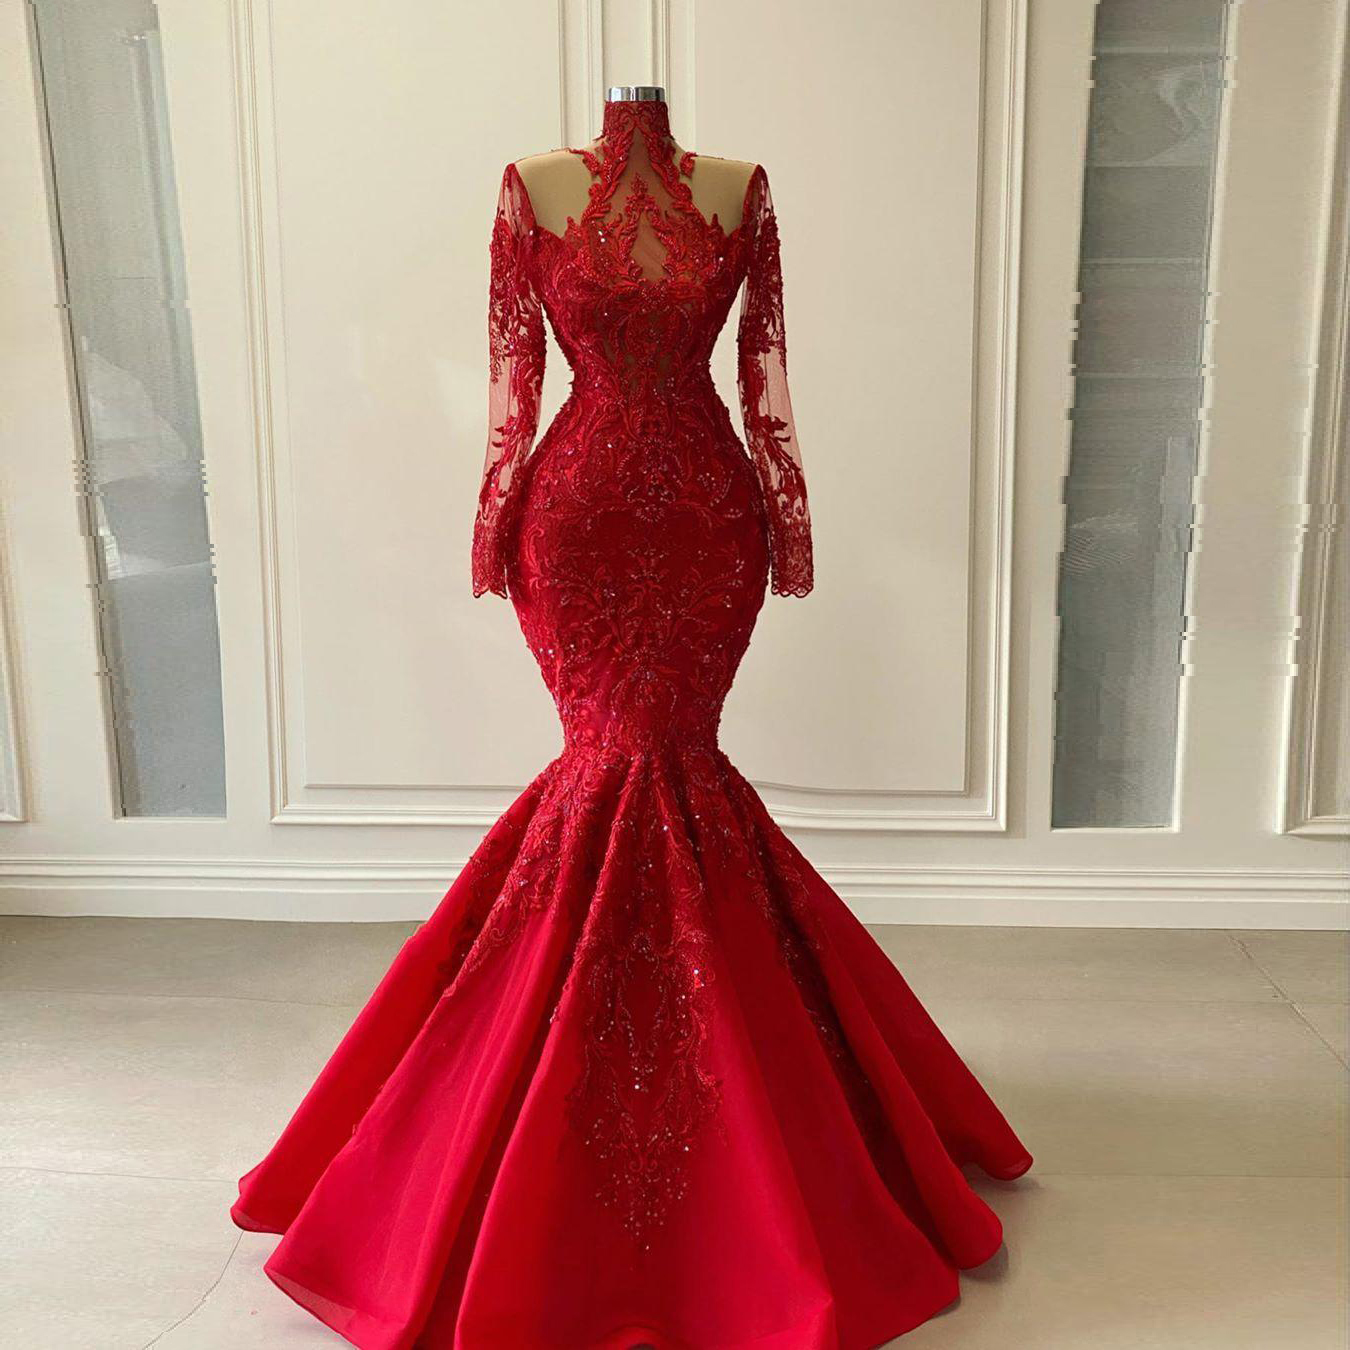 Red Elegant Mermaid Evening Dresses Long Sleeve Plus Size Lace Appliques High Neck Women Prom 1753